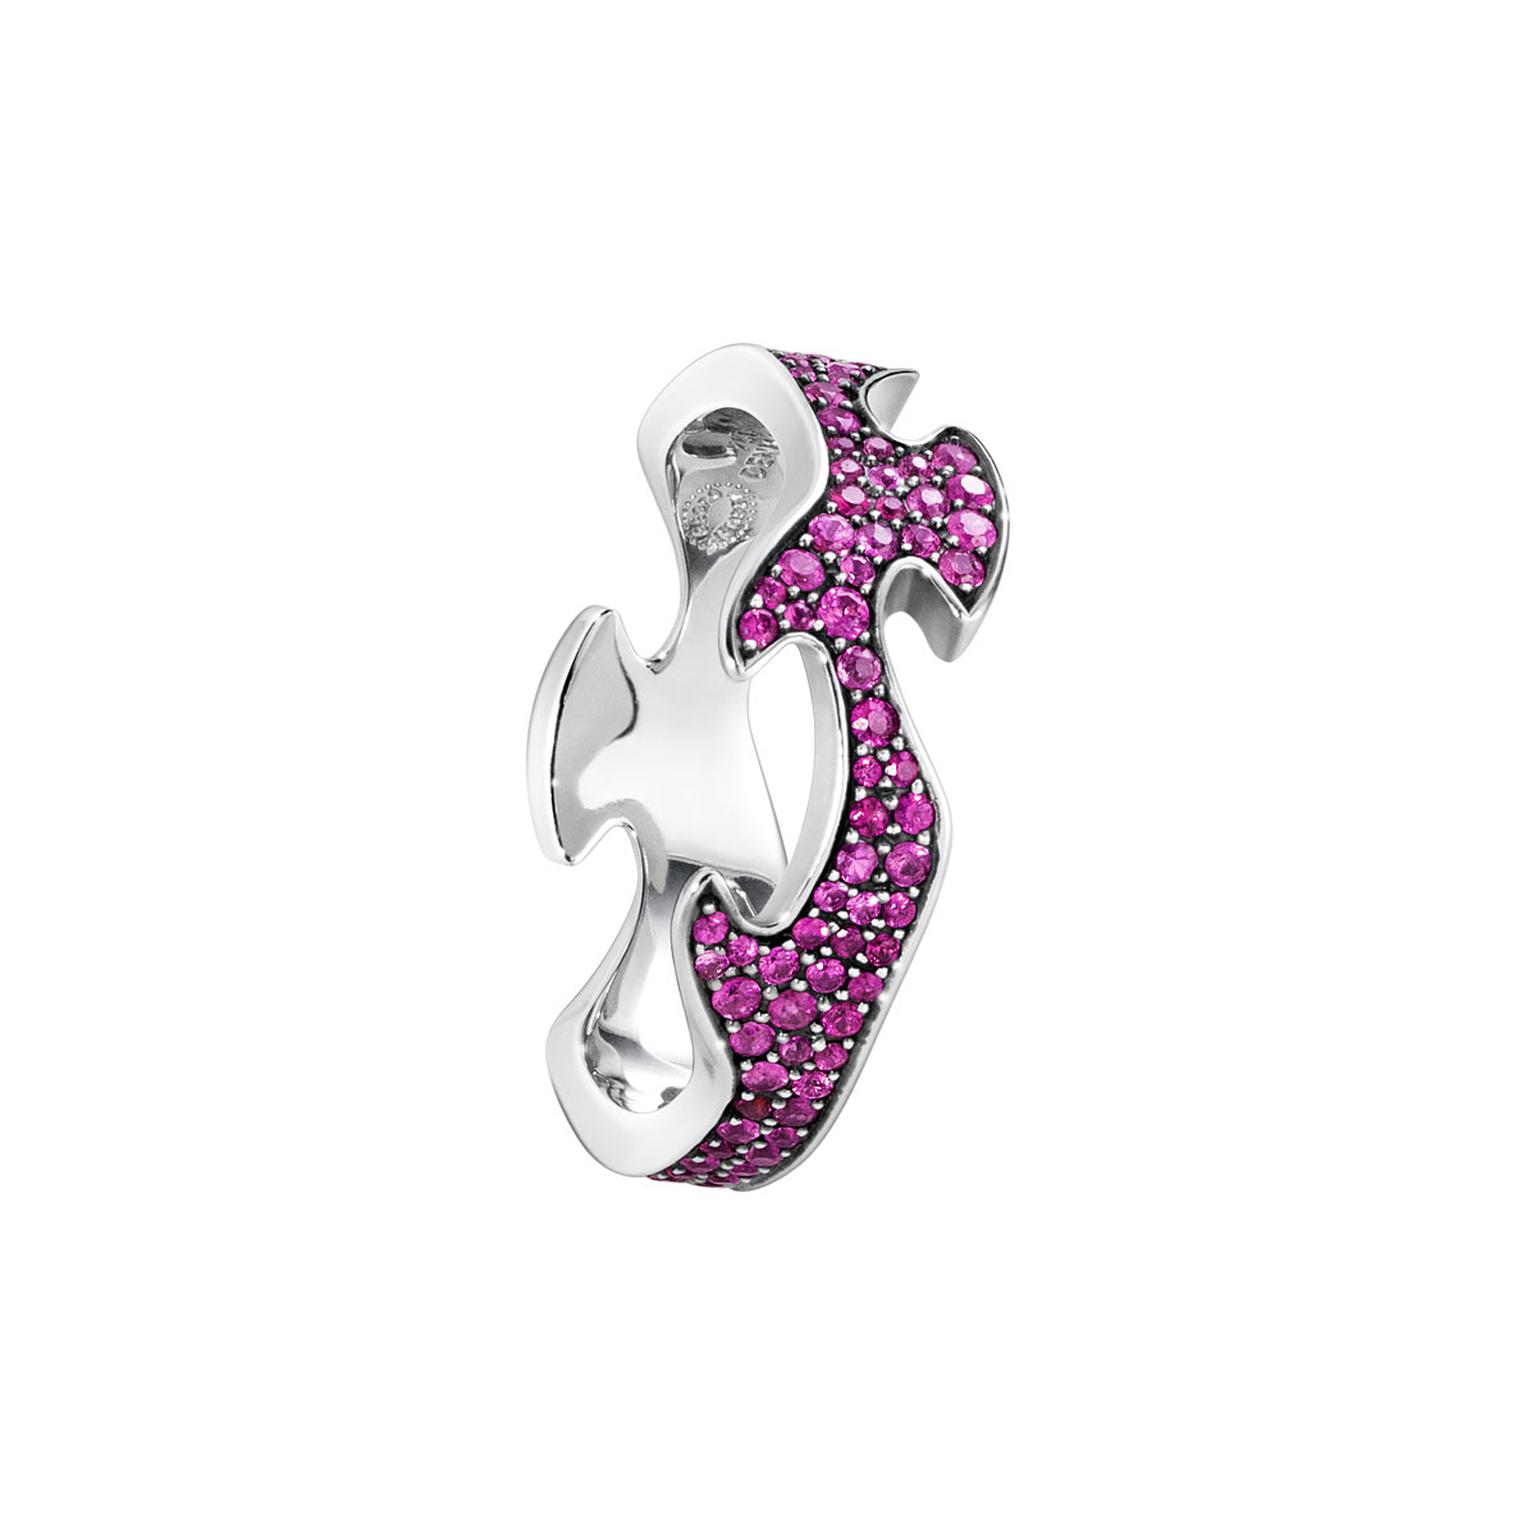 Georg Jensen Fusion Centre ring in white gold with pink sapphires 